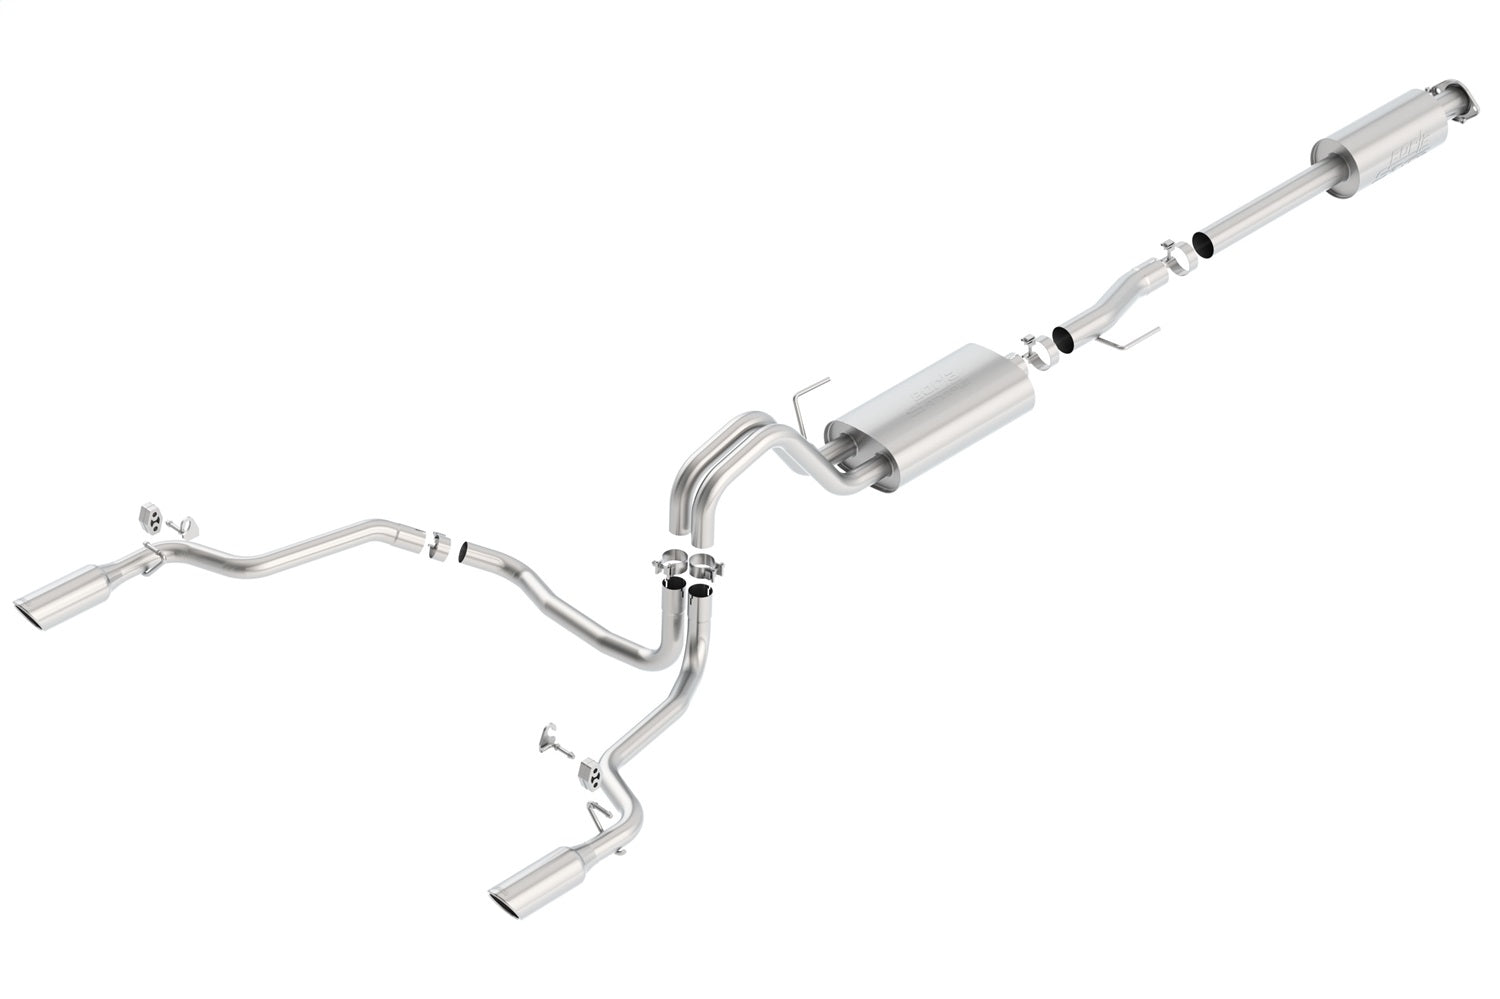 Borla 140615 S-Type Cat-Back Exhaust System Fits 15-20 F-150